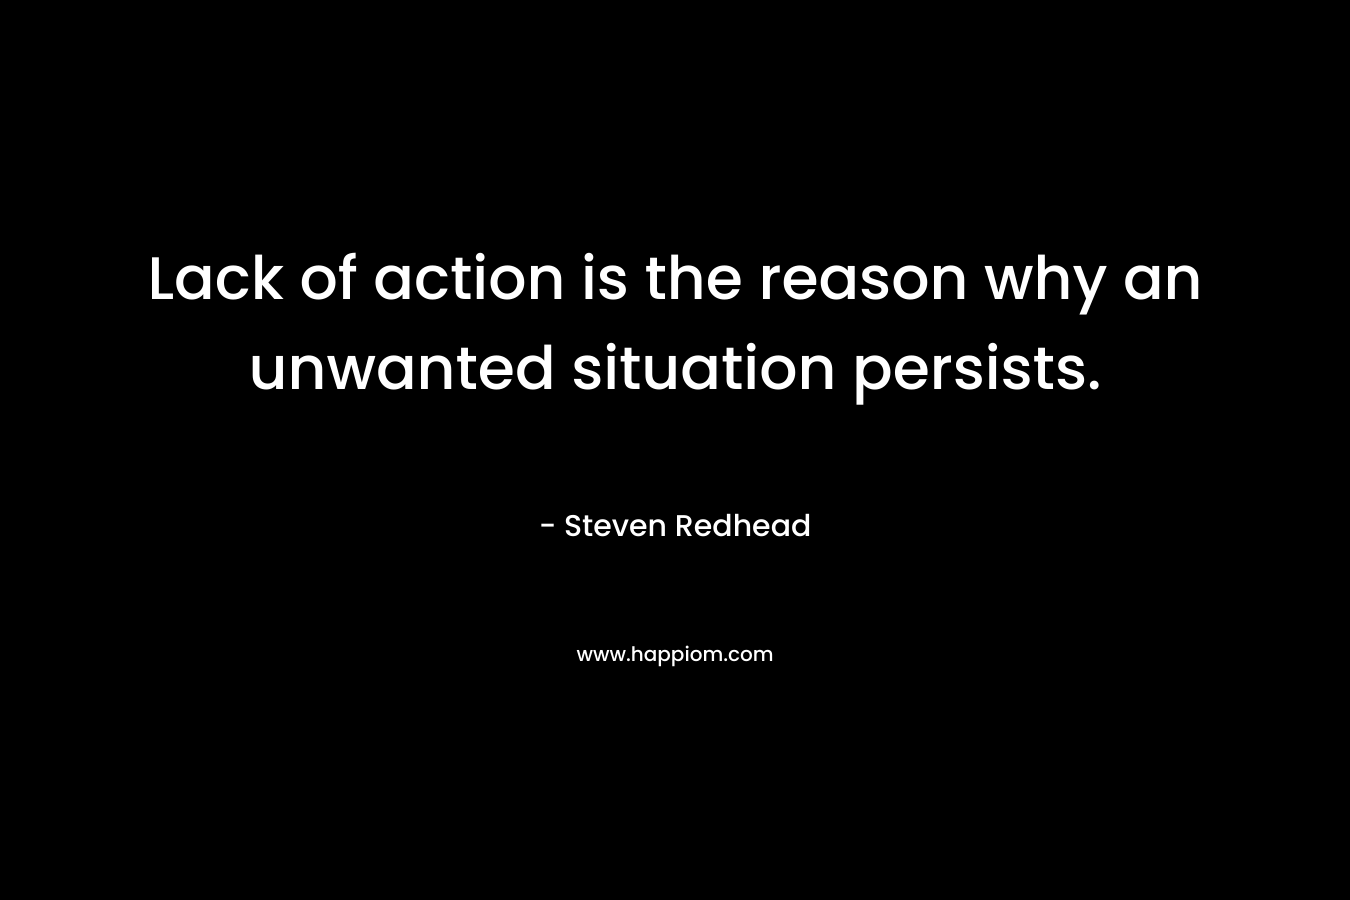 Lack of action is the reason why an unwanted situation persists.